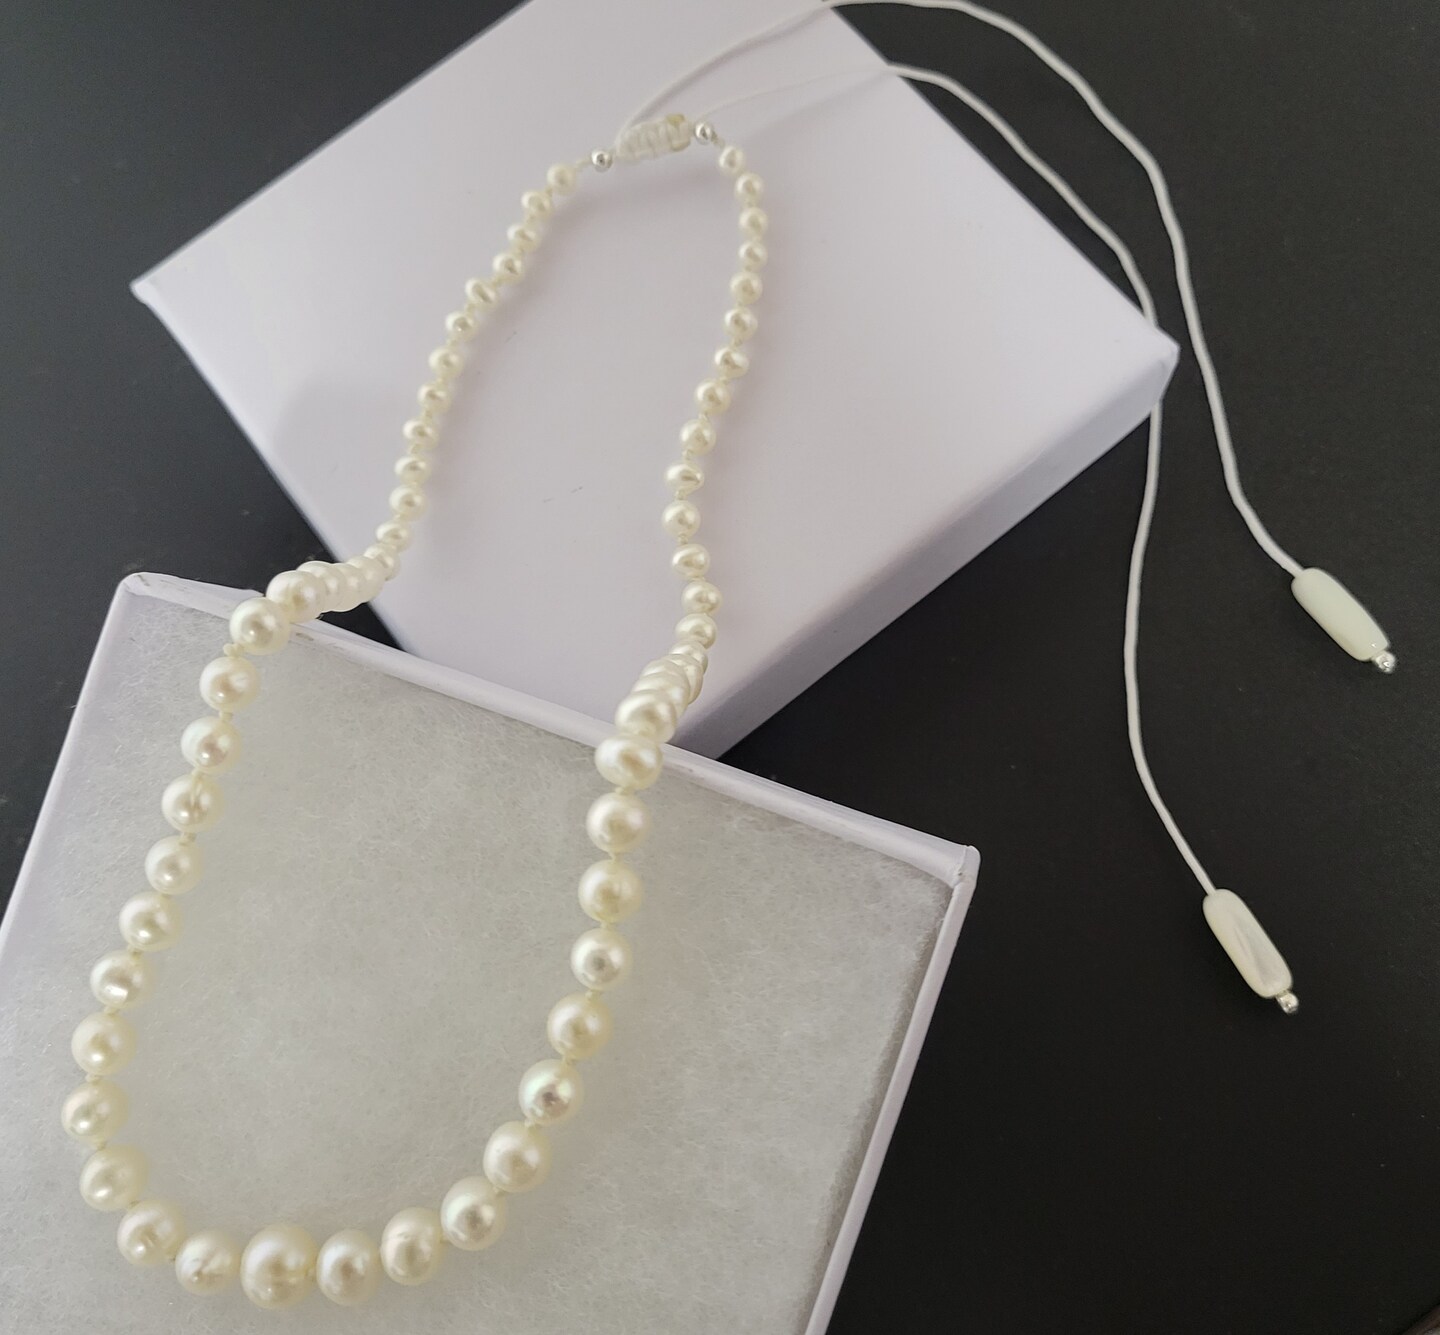 Pearl Embellished Adjustable Necklace With Earrings | A21-BALA23-13 |  Cilory.com